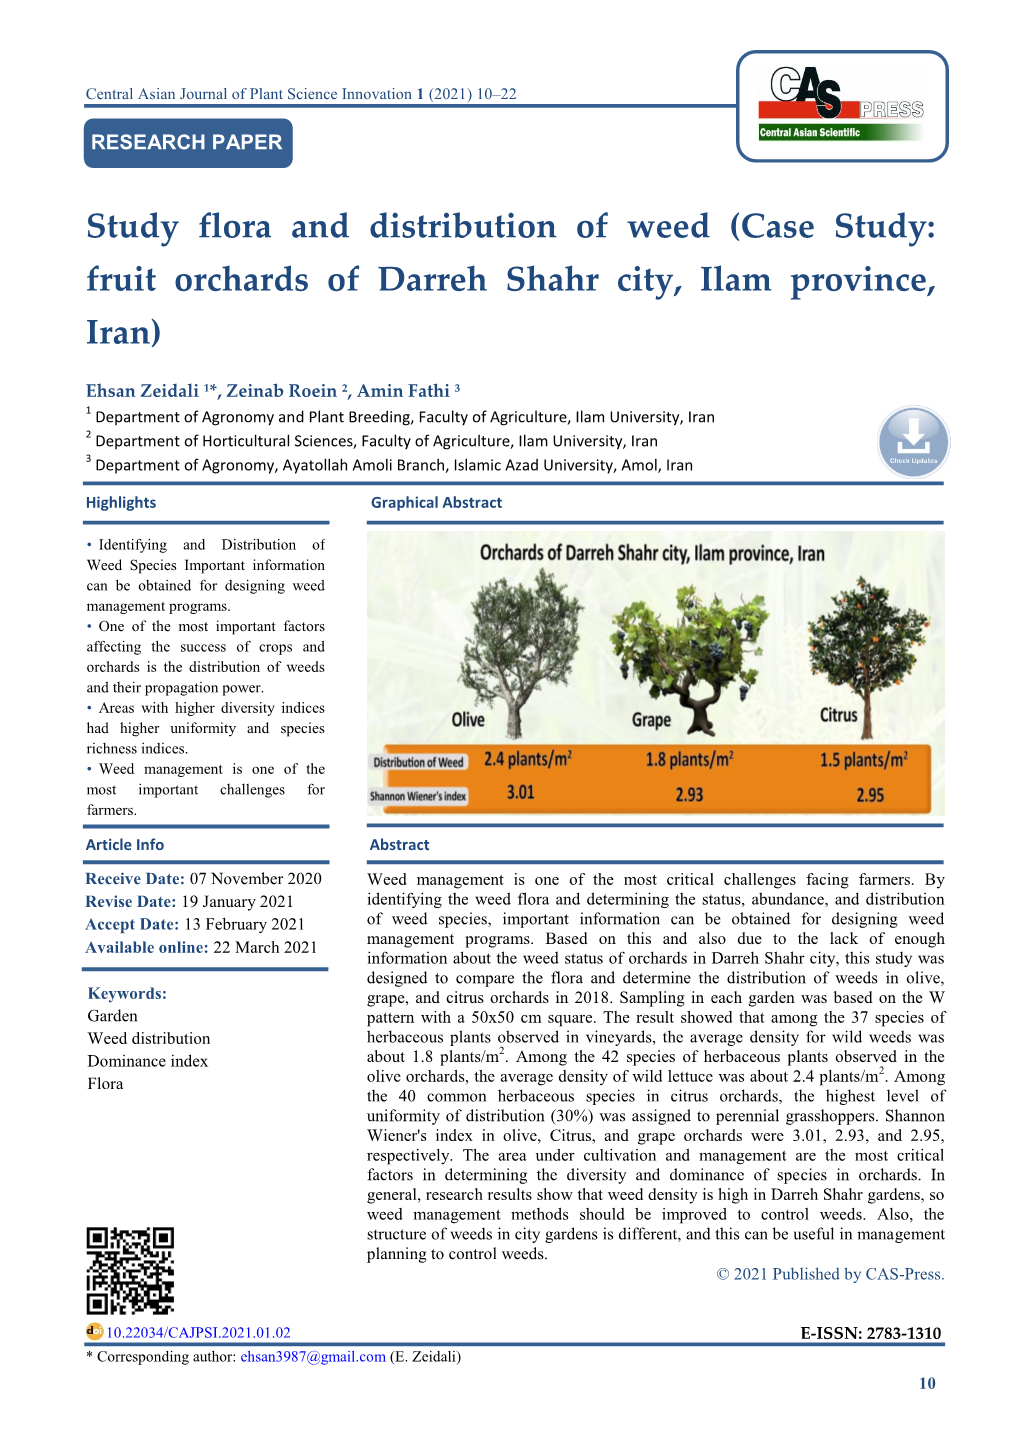 Study Flora and Distribution of Weed (Case Study: Fruit Orchards of Darreh Shahr City, Ilam Province, Iran)